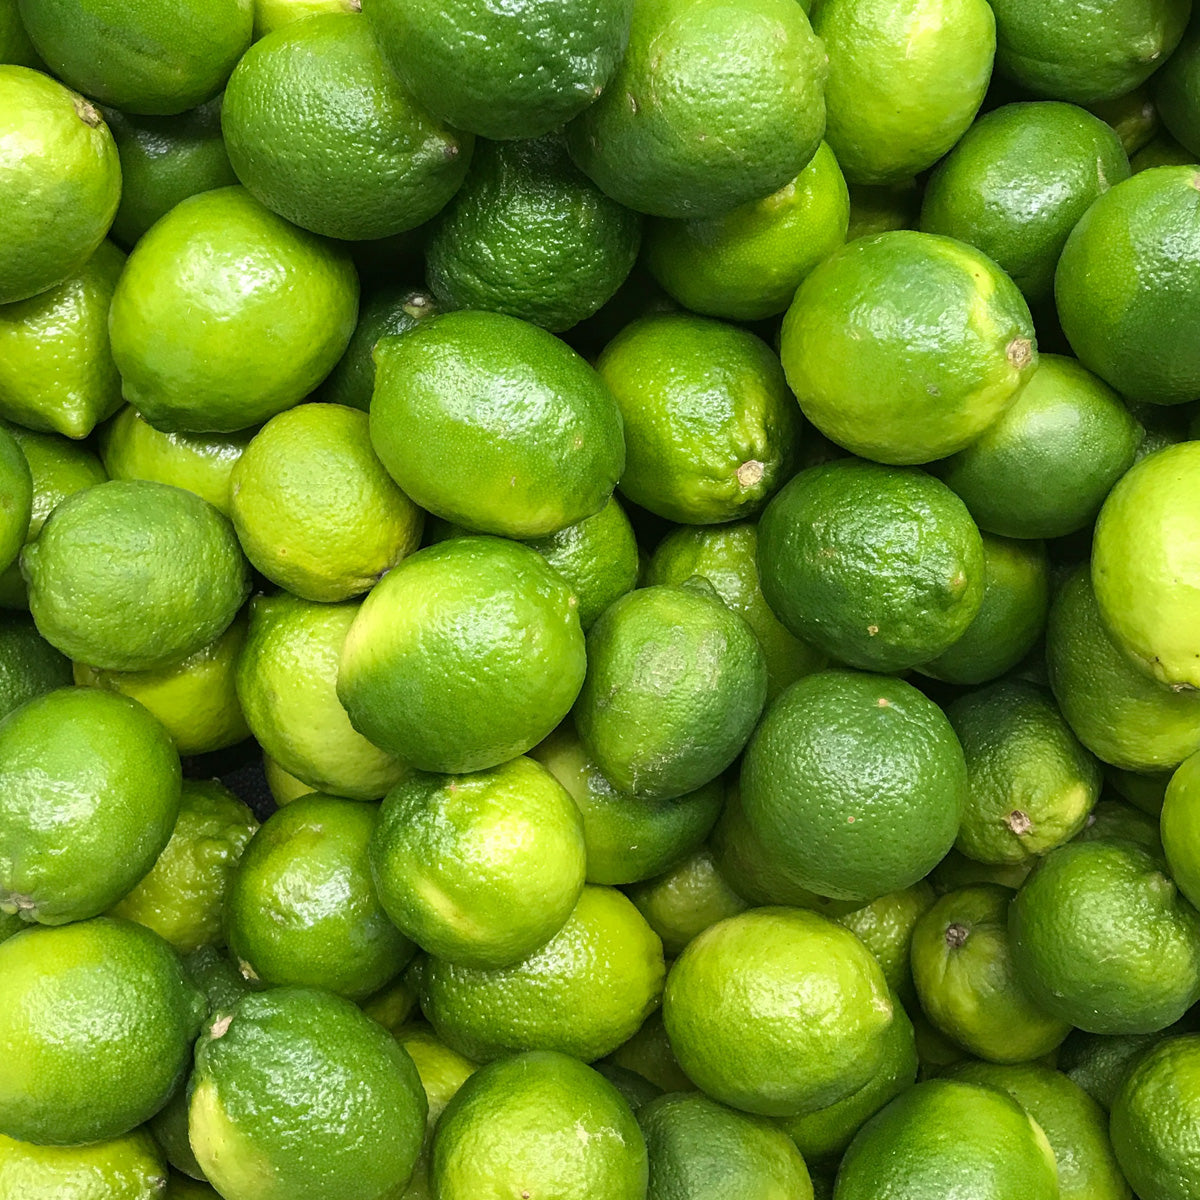 Limes Fruit - Zesty and Citrusy